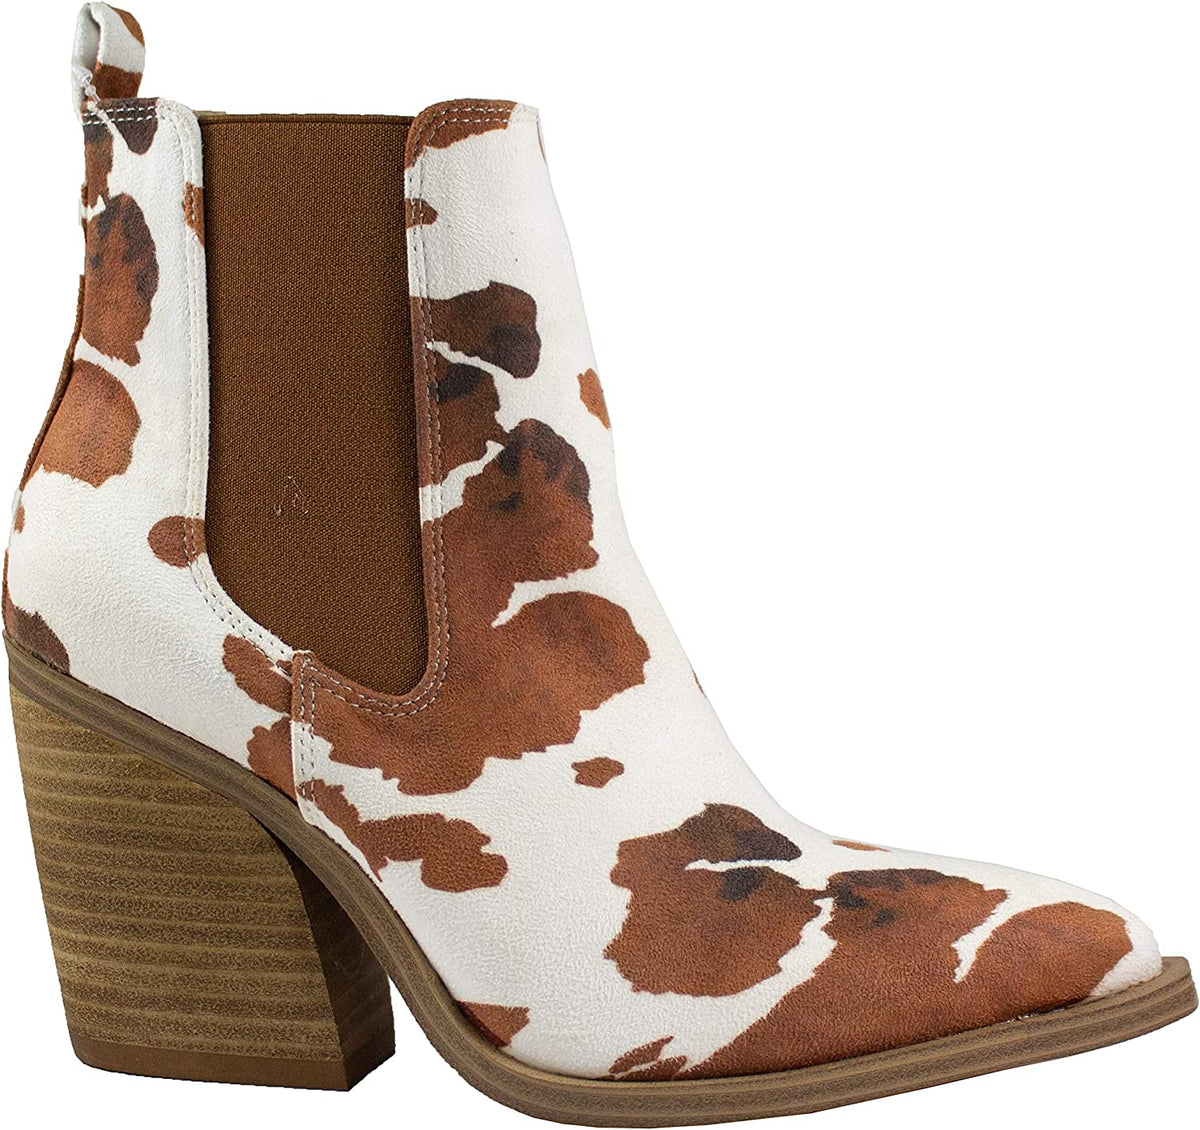 Brown Cow Print Western Booties Animal Prints Ankle Boot with Stacked Heel